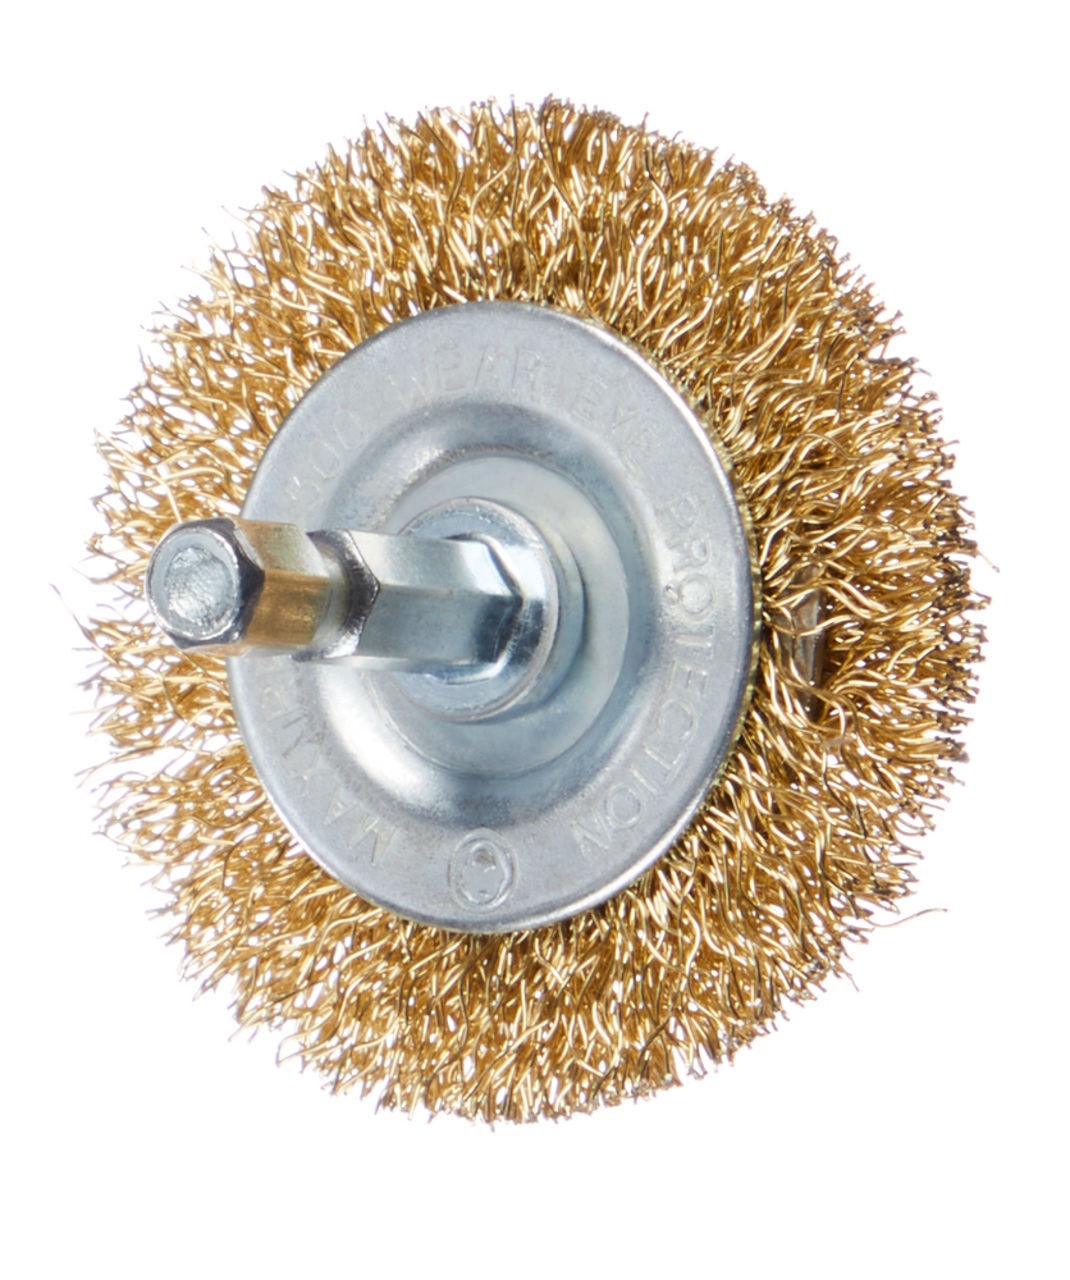 Wire Brush Set, Brass Wheel And Cup Brushes With Shank, Sanding